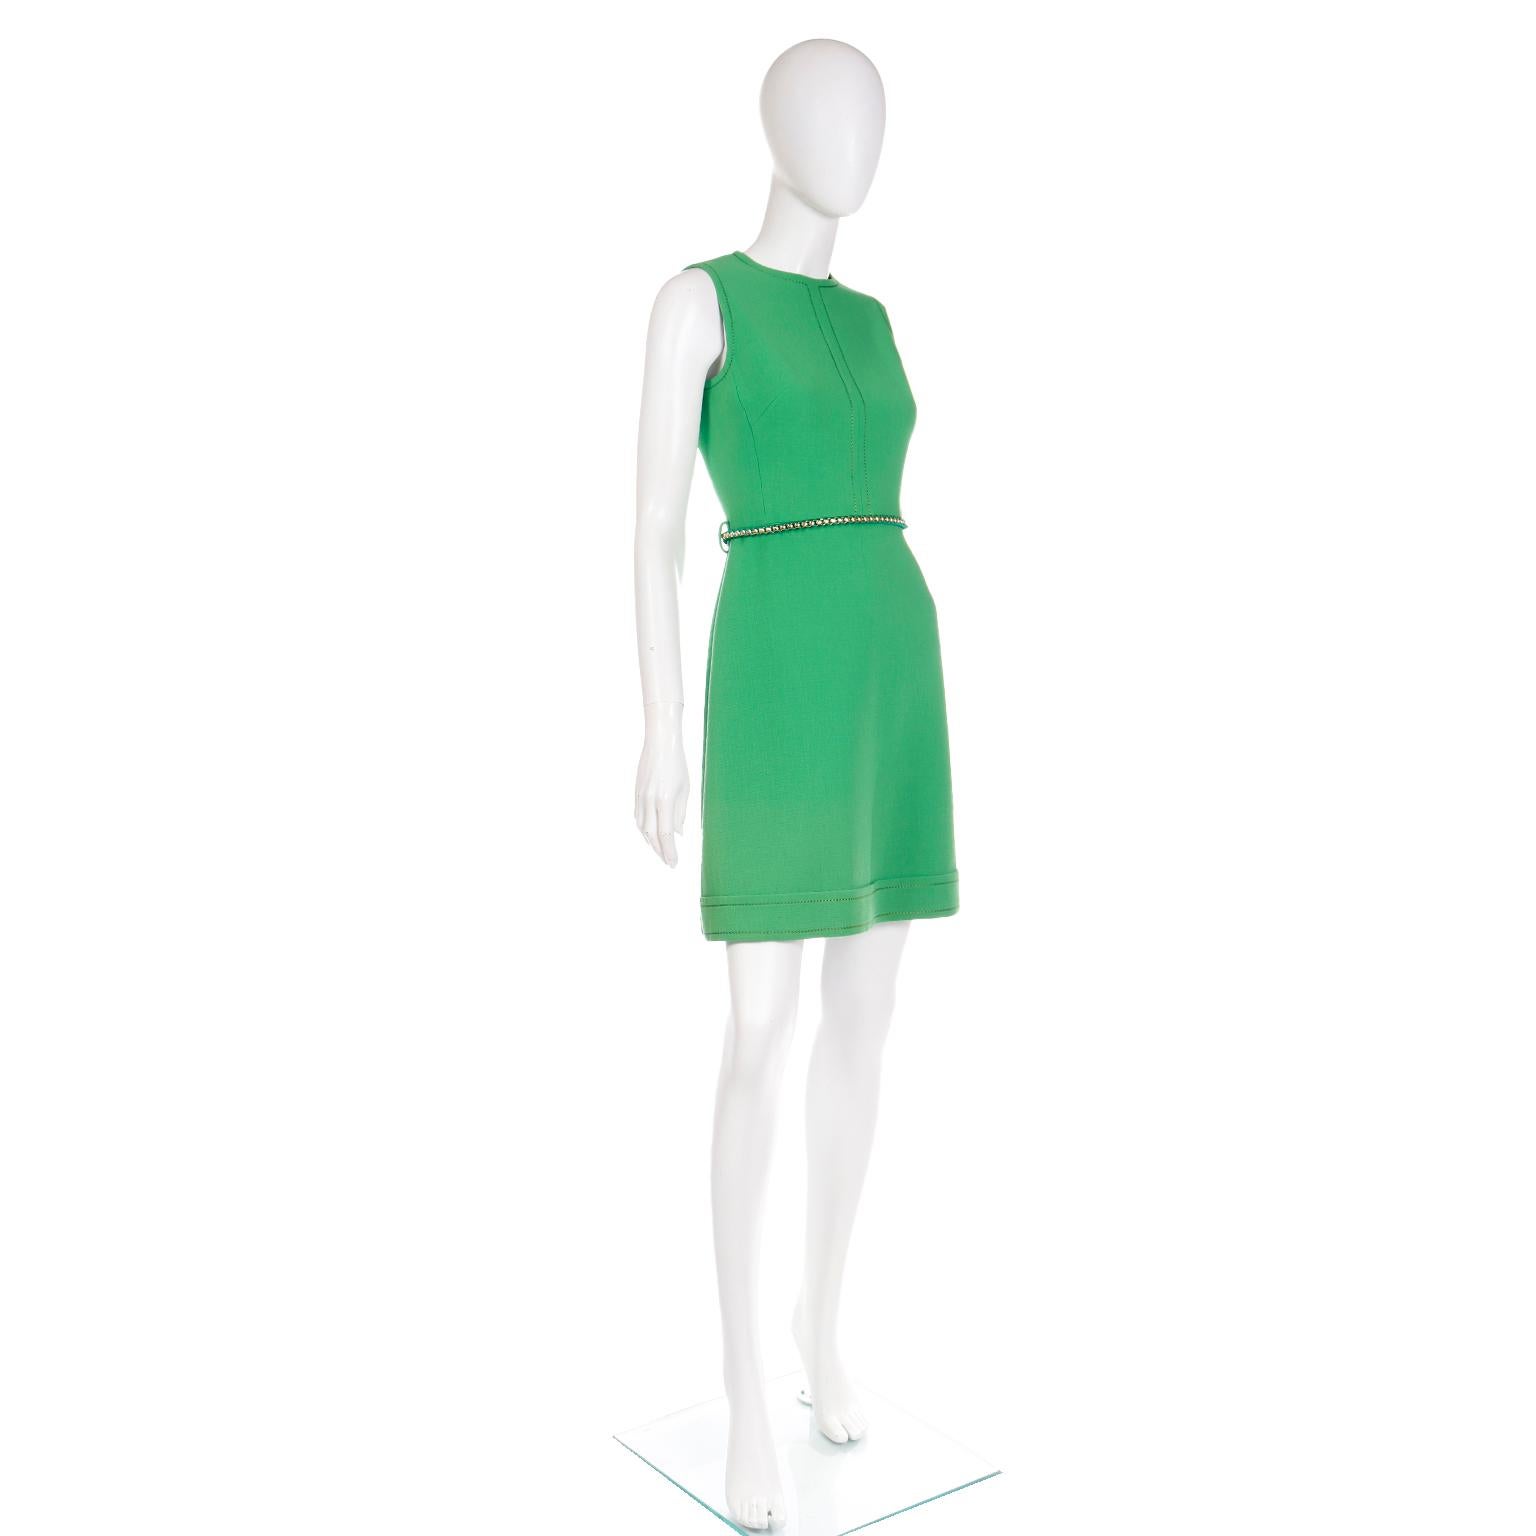 1960s Couture Veronese 414 Saint Honore Paris Vintage Green Sleeveless Dress In Excellent Condition For Sale In Portland, OR